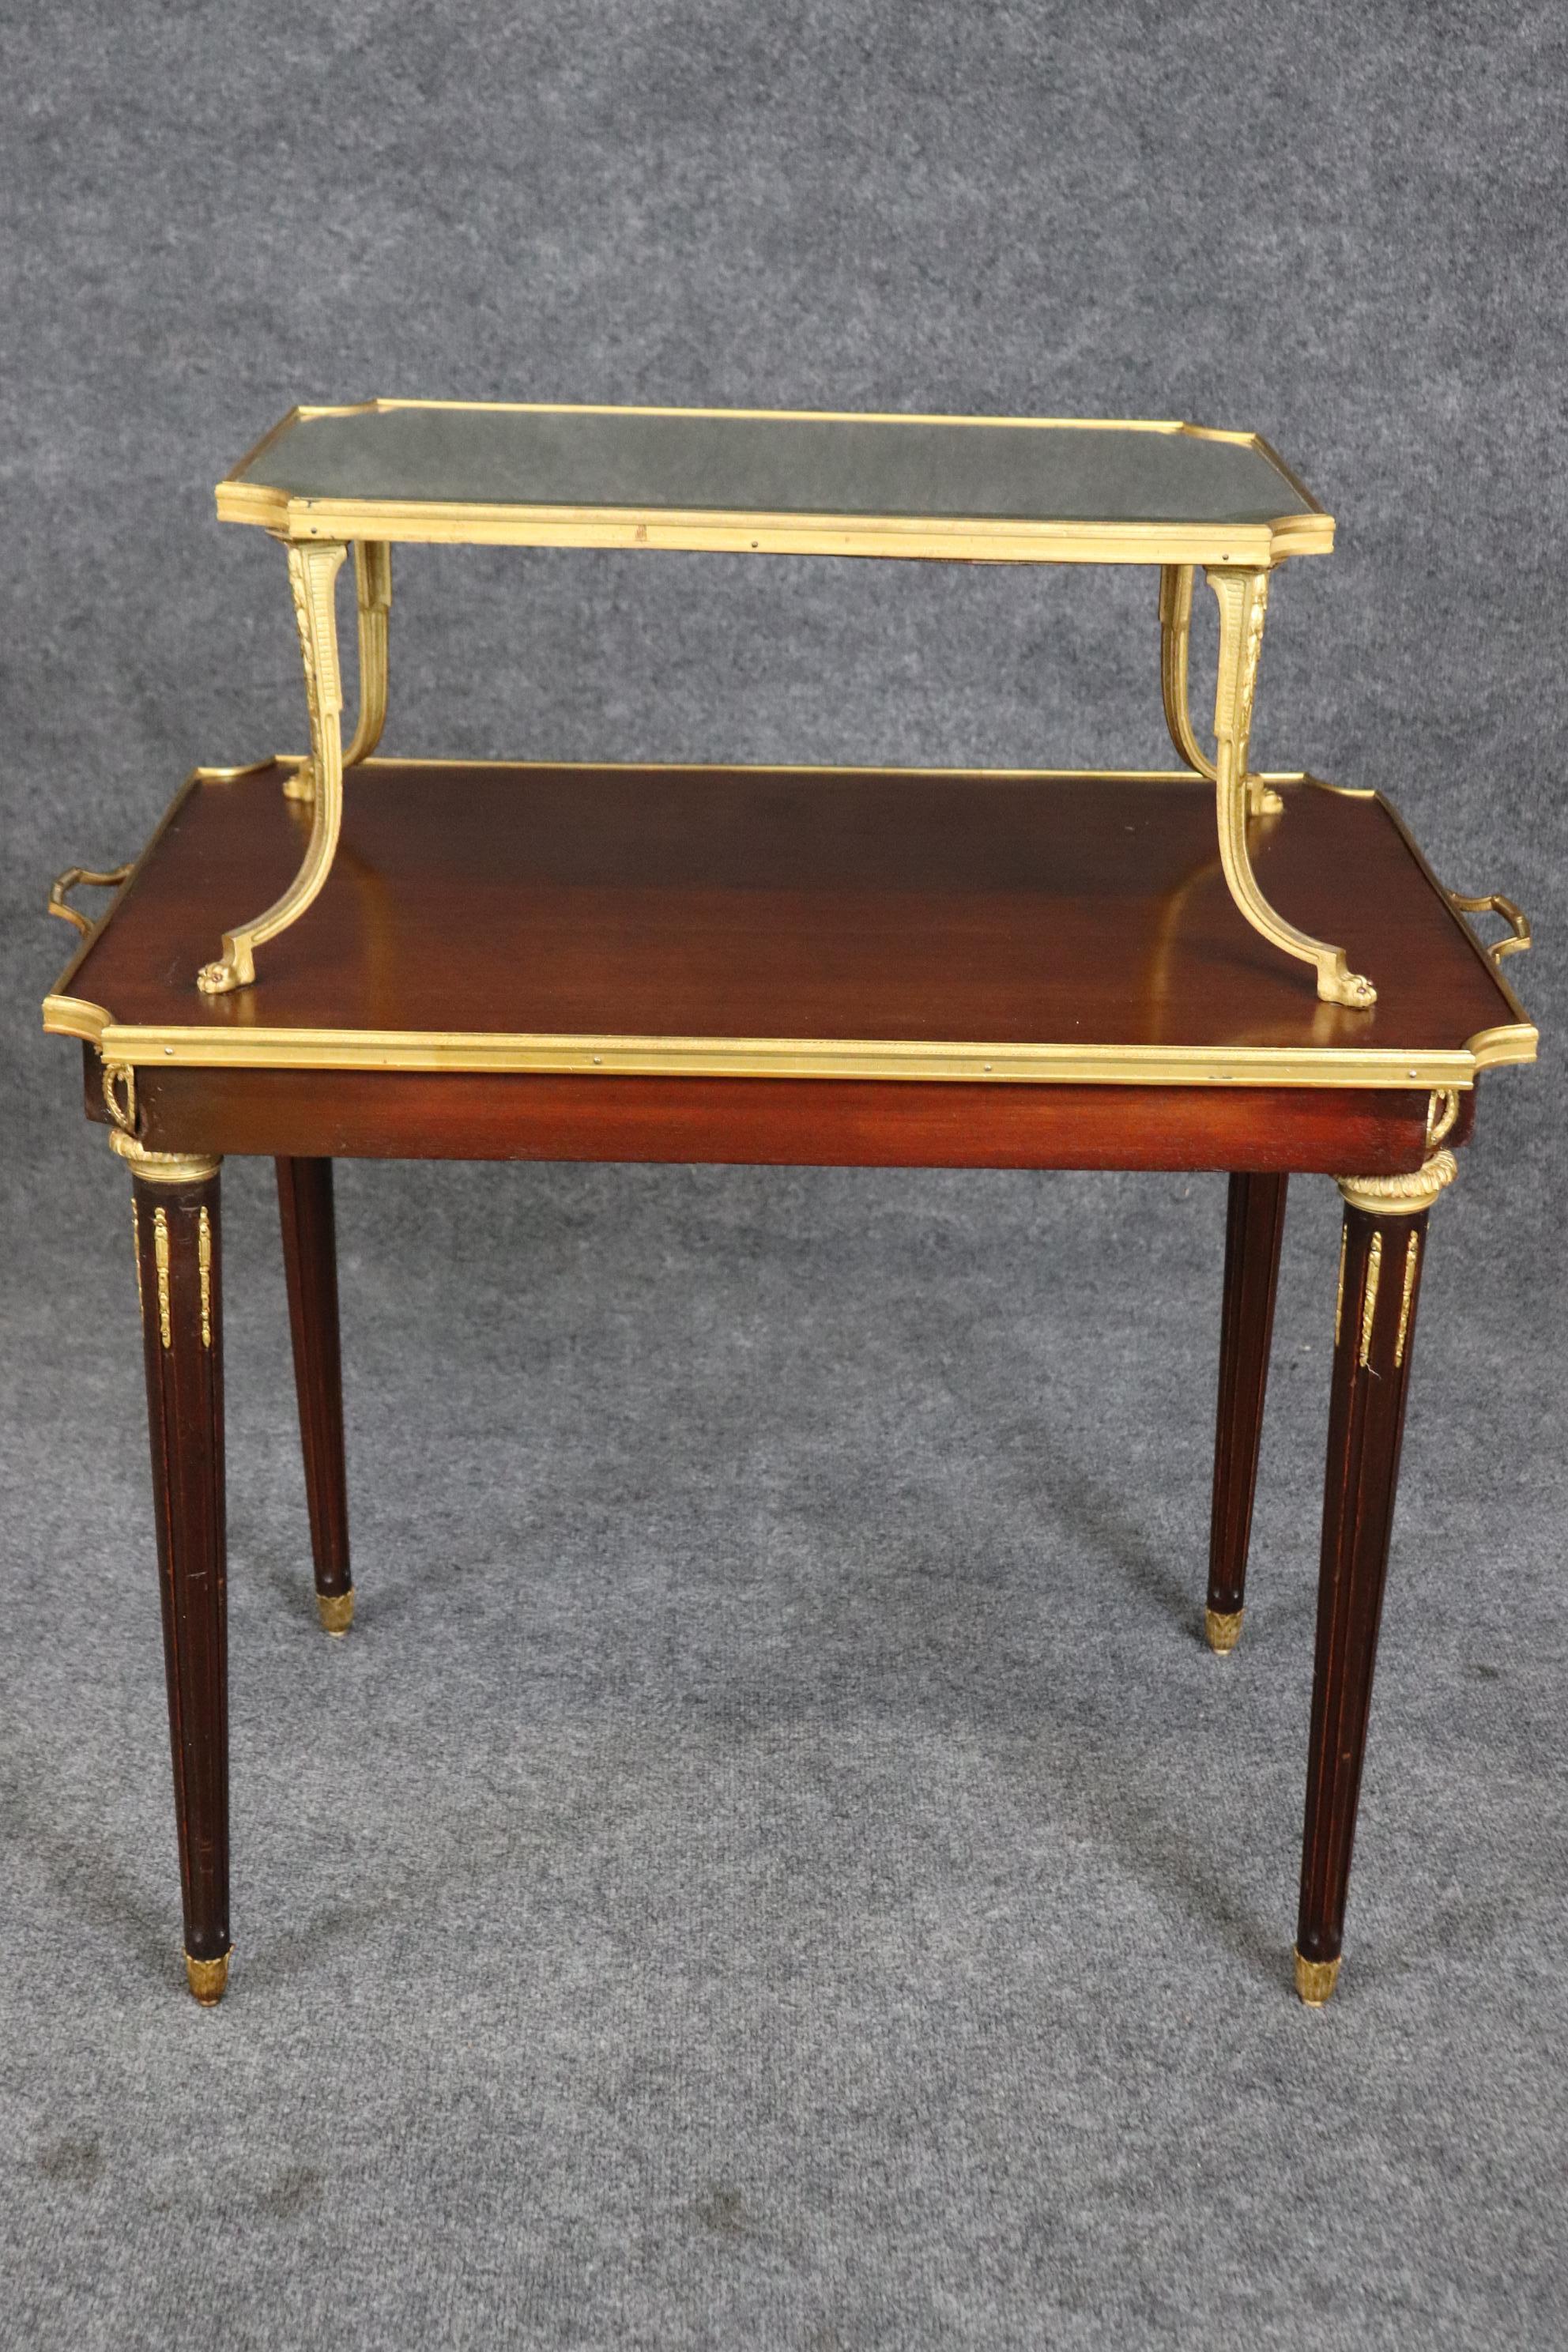 Fine Quality French Dore' Bronze and Mahogany Directoire Dessert Tray Top Table For Sale 4